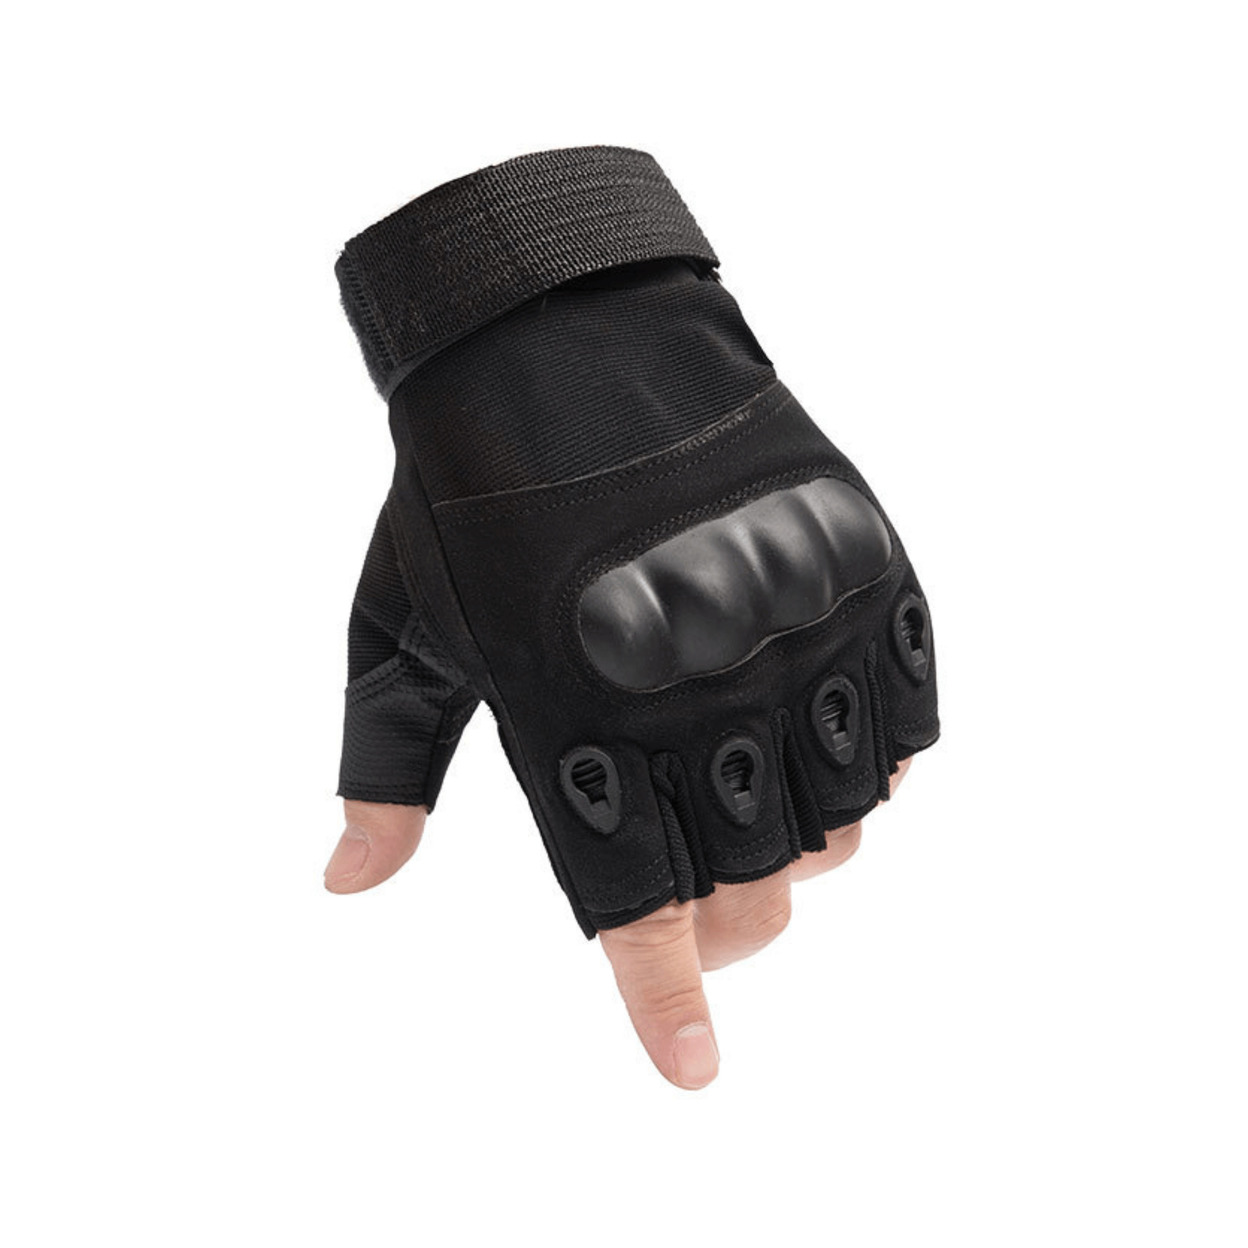 Tactical Fingerless Airsoft Gloves For Outdoor Sports, Paintball, And Motorcycling - Black, Large